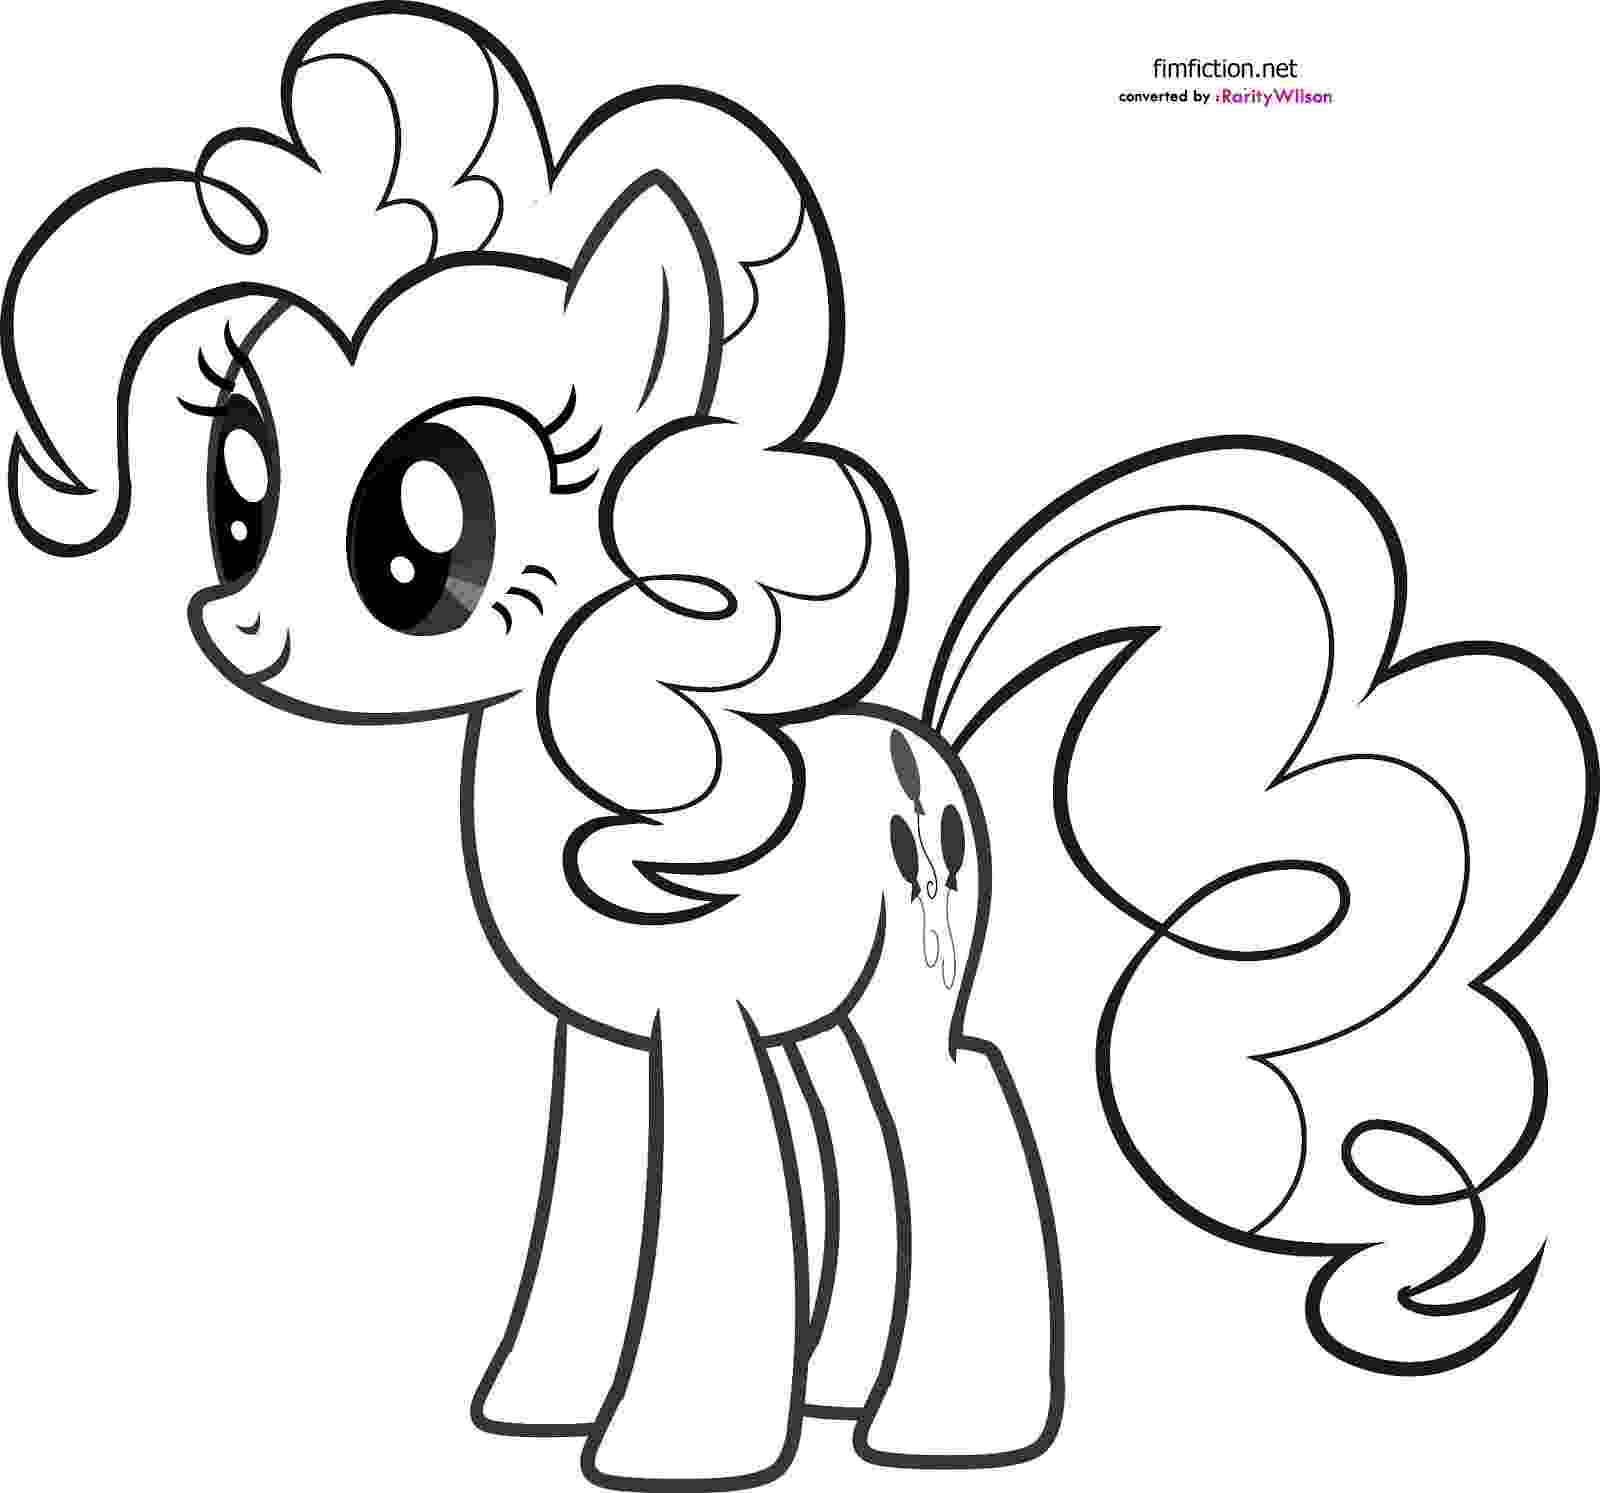 pinkie pie coloring page pinkie pie pony coloring pages for girls to print for free page pie coloring pinkie 